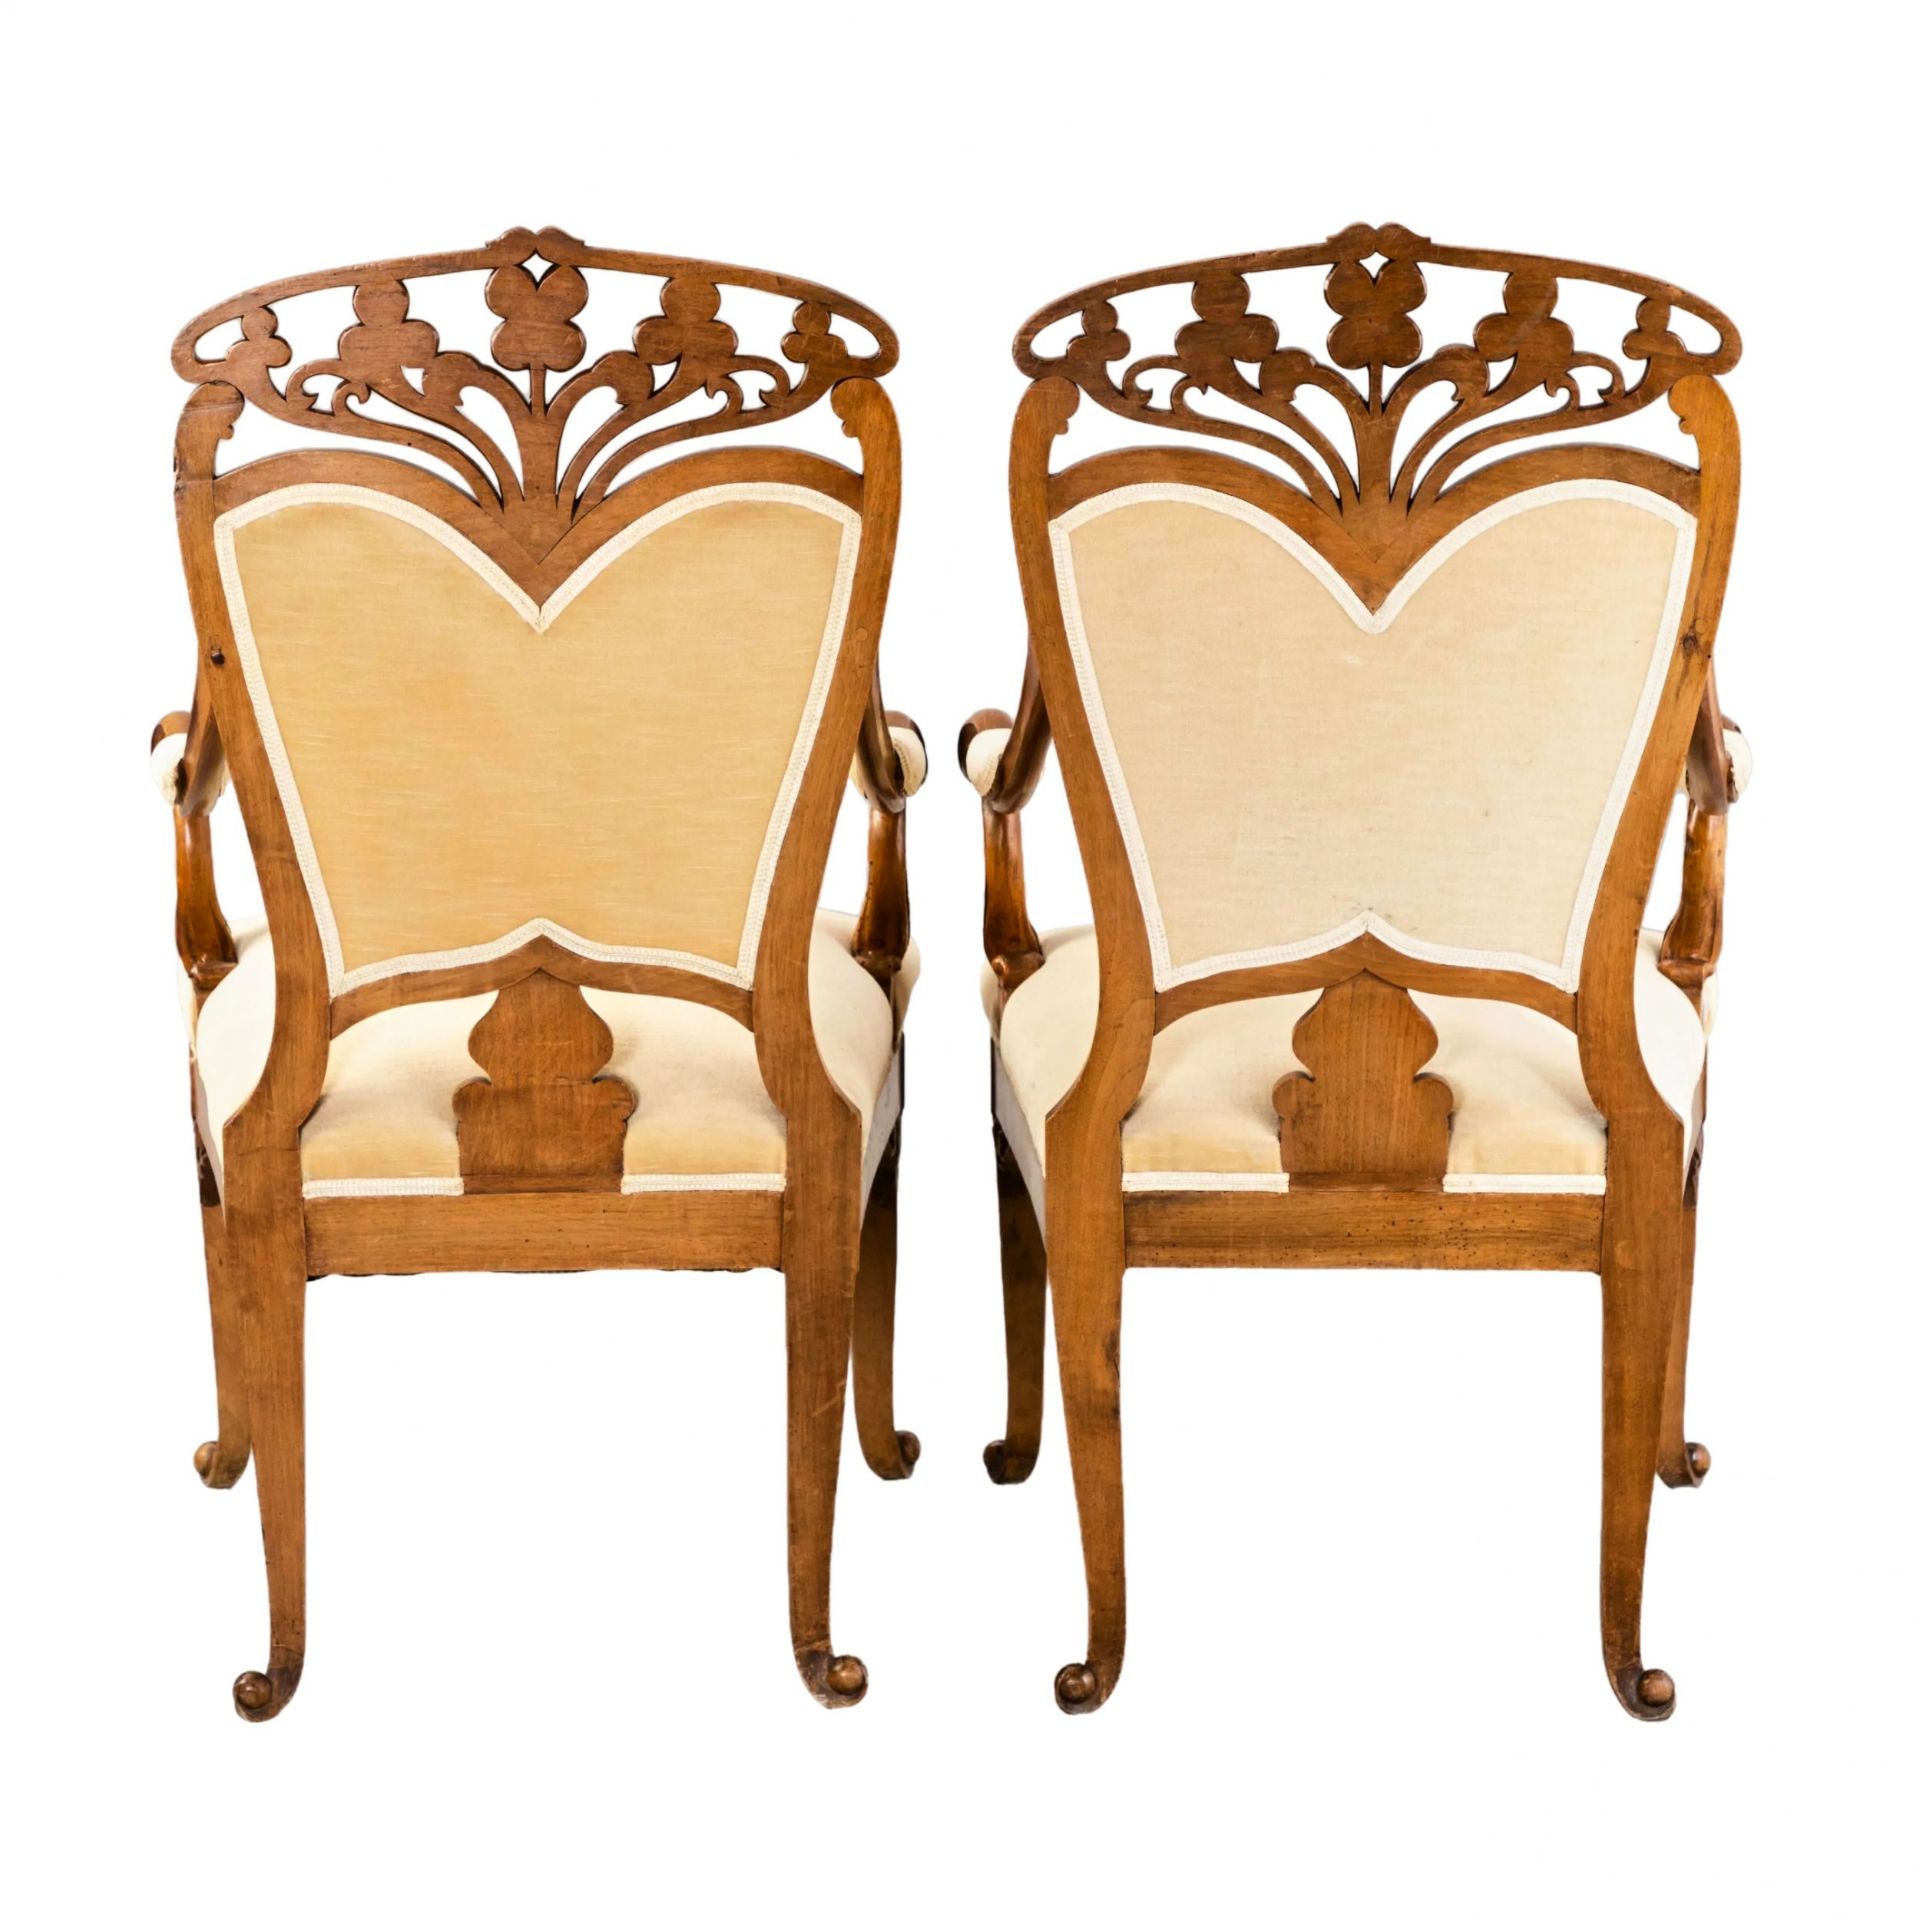 Furniture set in Art Nouveau style. France. 1905 - Image 8 of 13